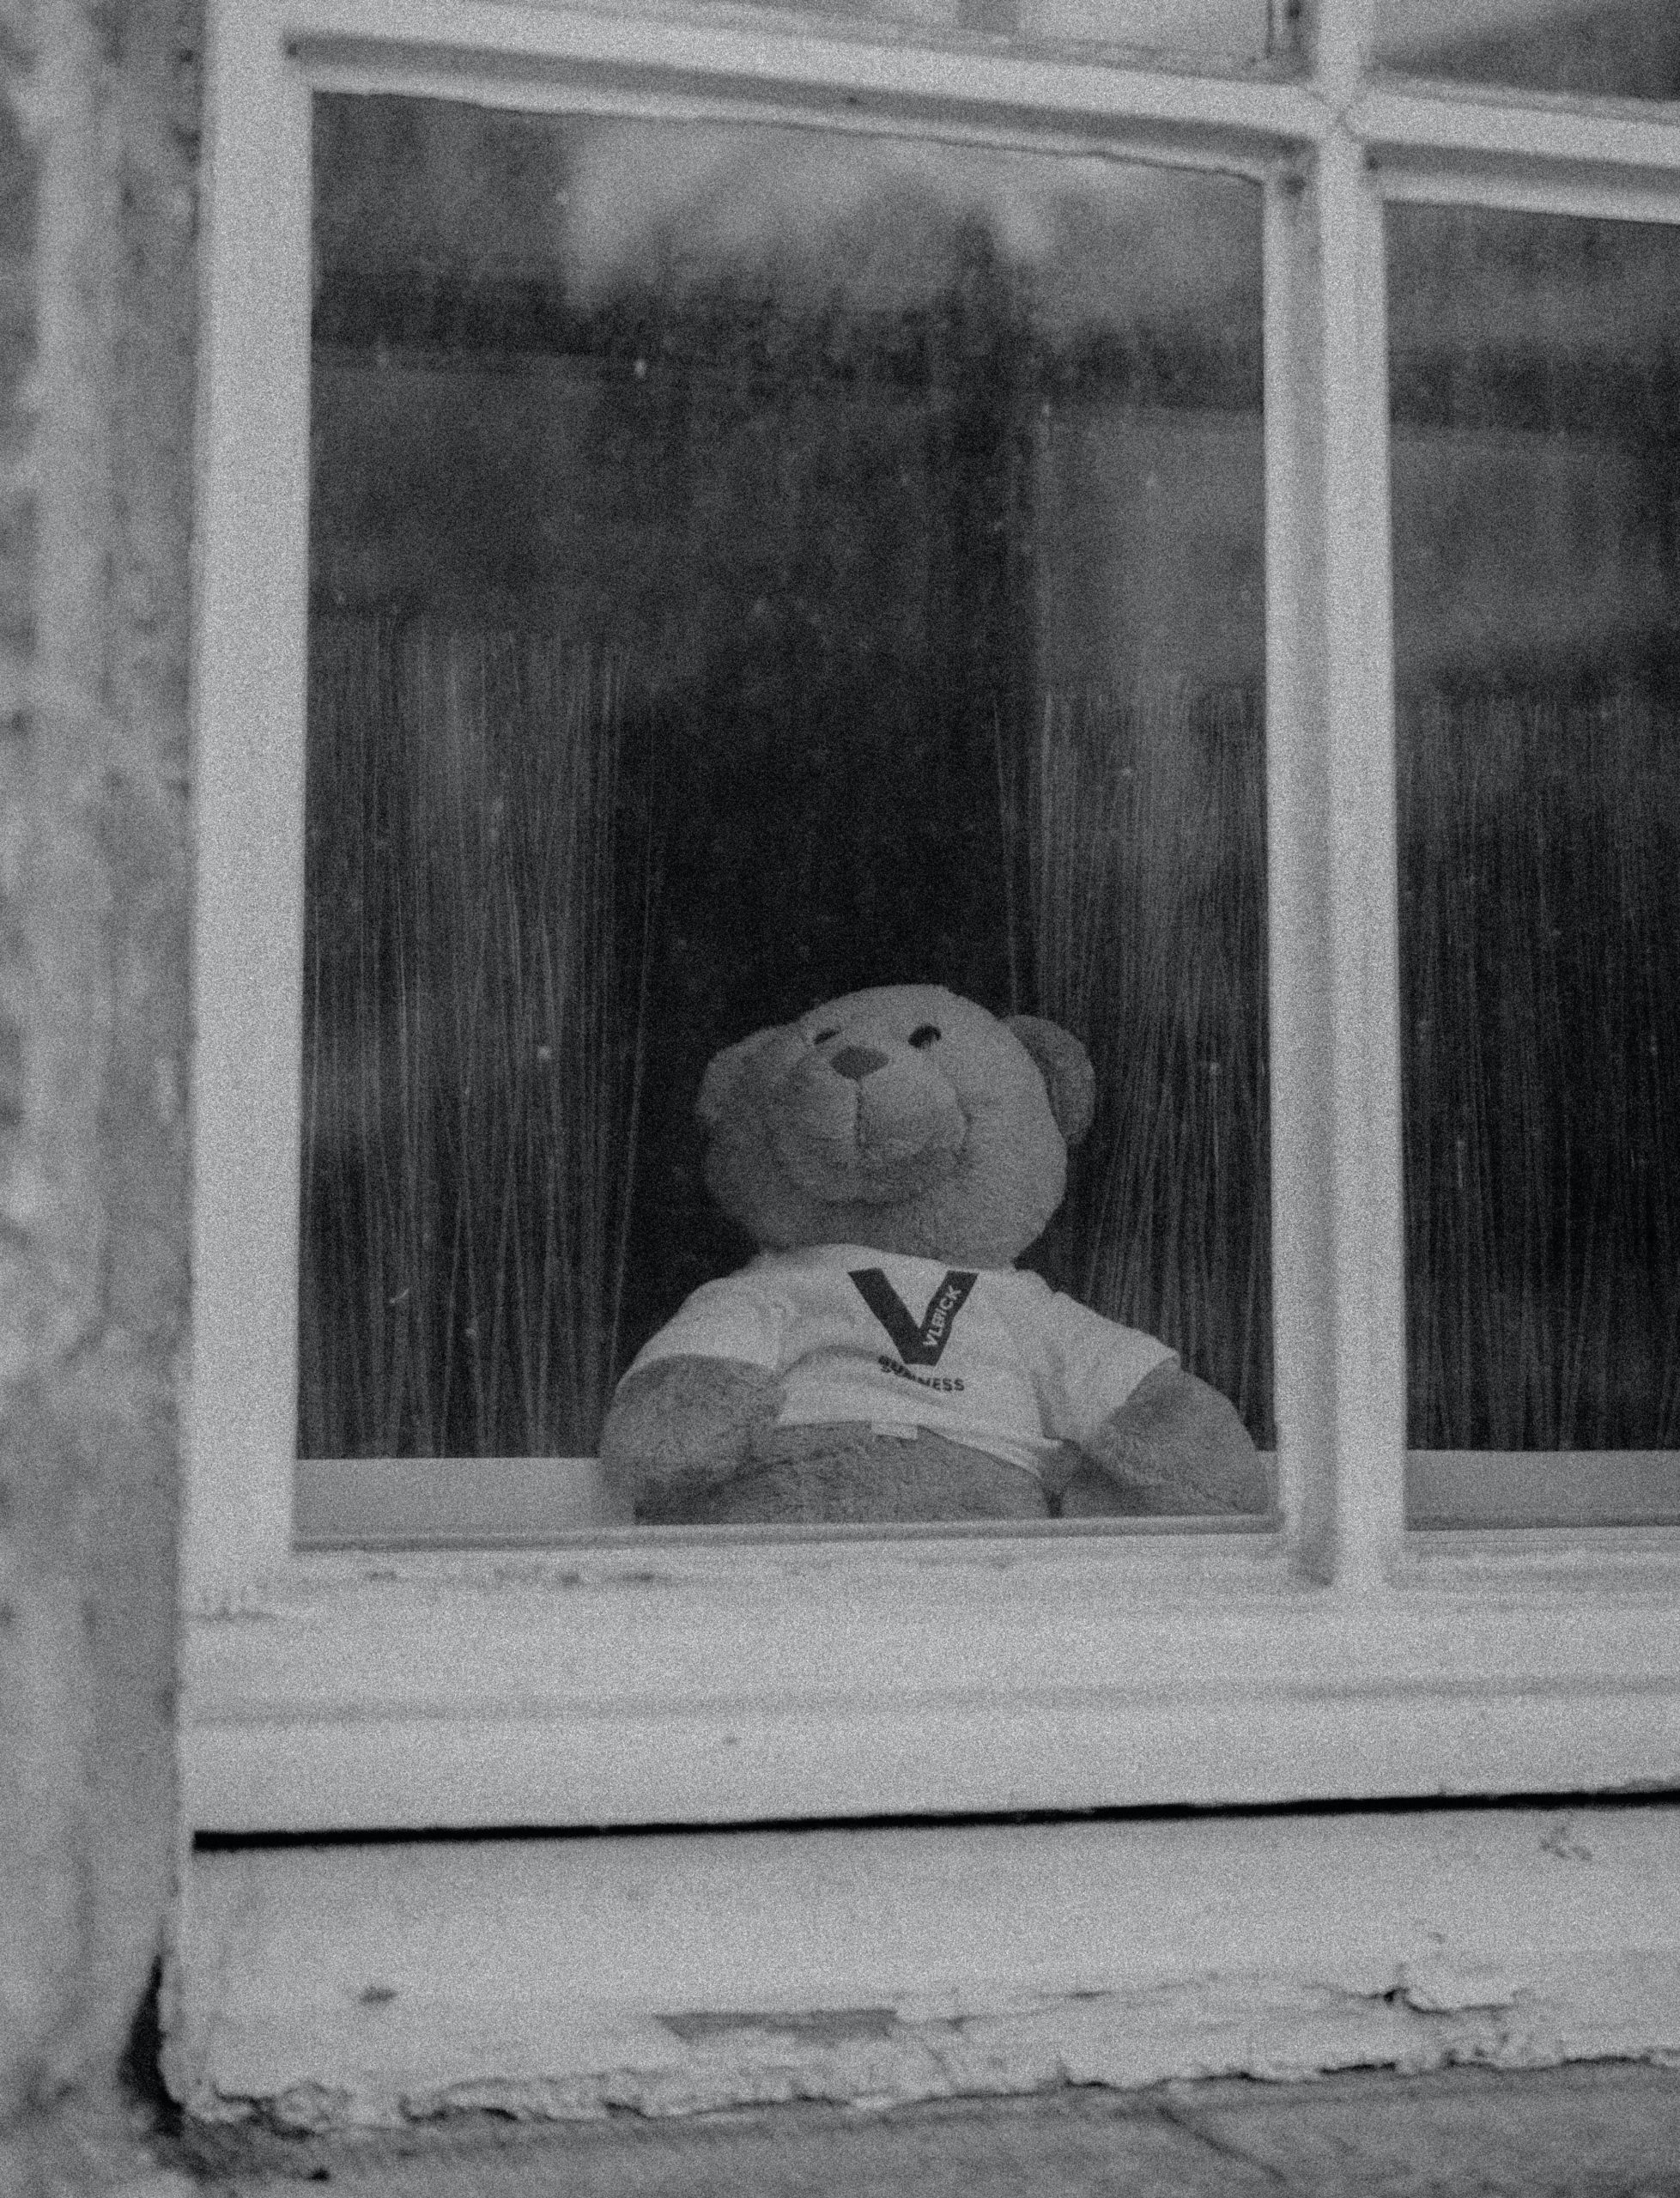 grayscale photo of bear plush toy in window